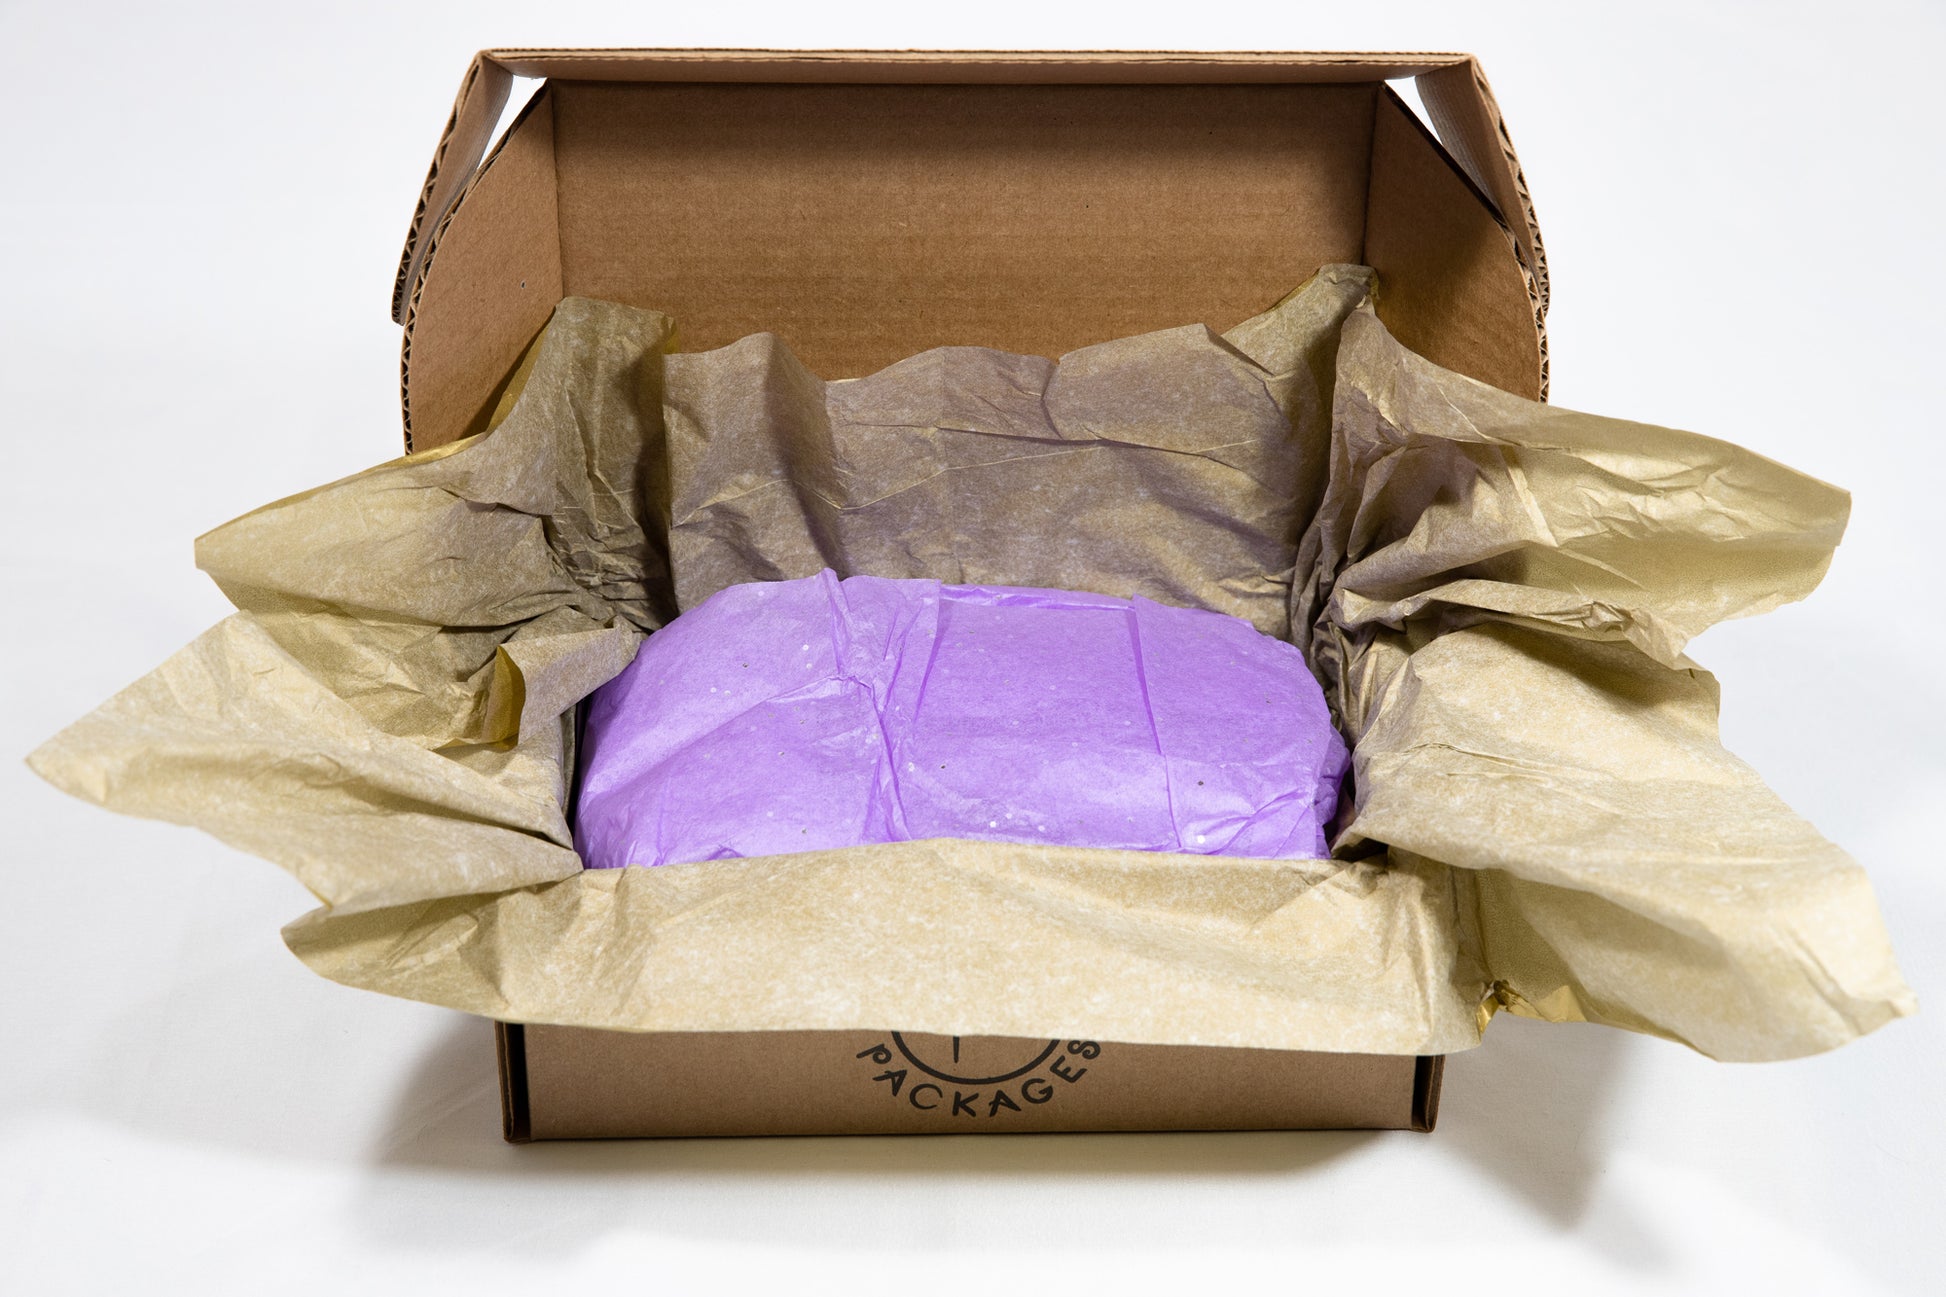 Beyond the gold tissue paper, the recipient discovers the amethyst gem stone tissue paper. The purple color is a subtle reminder that when we are in balance within, the Red (left) and Blue (right) sides of our brains naturally interoscillate creating the color purple!